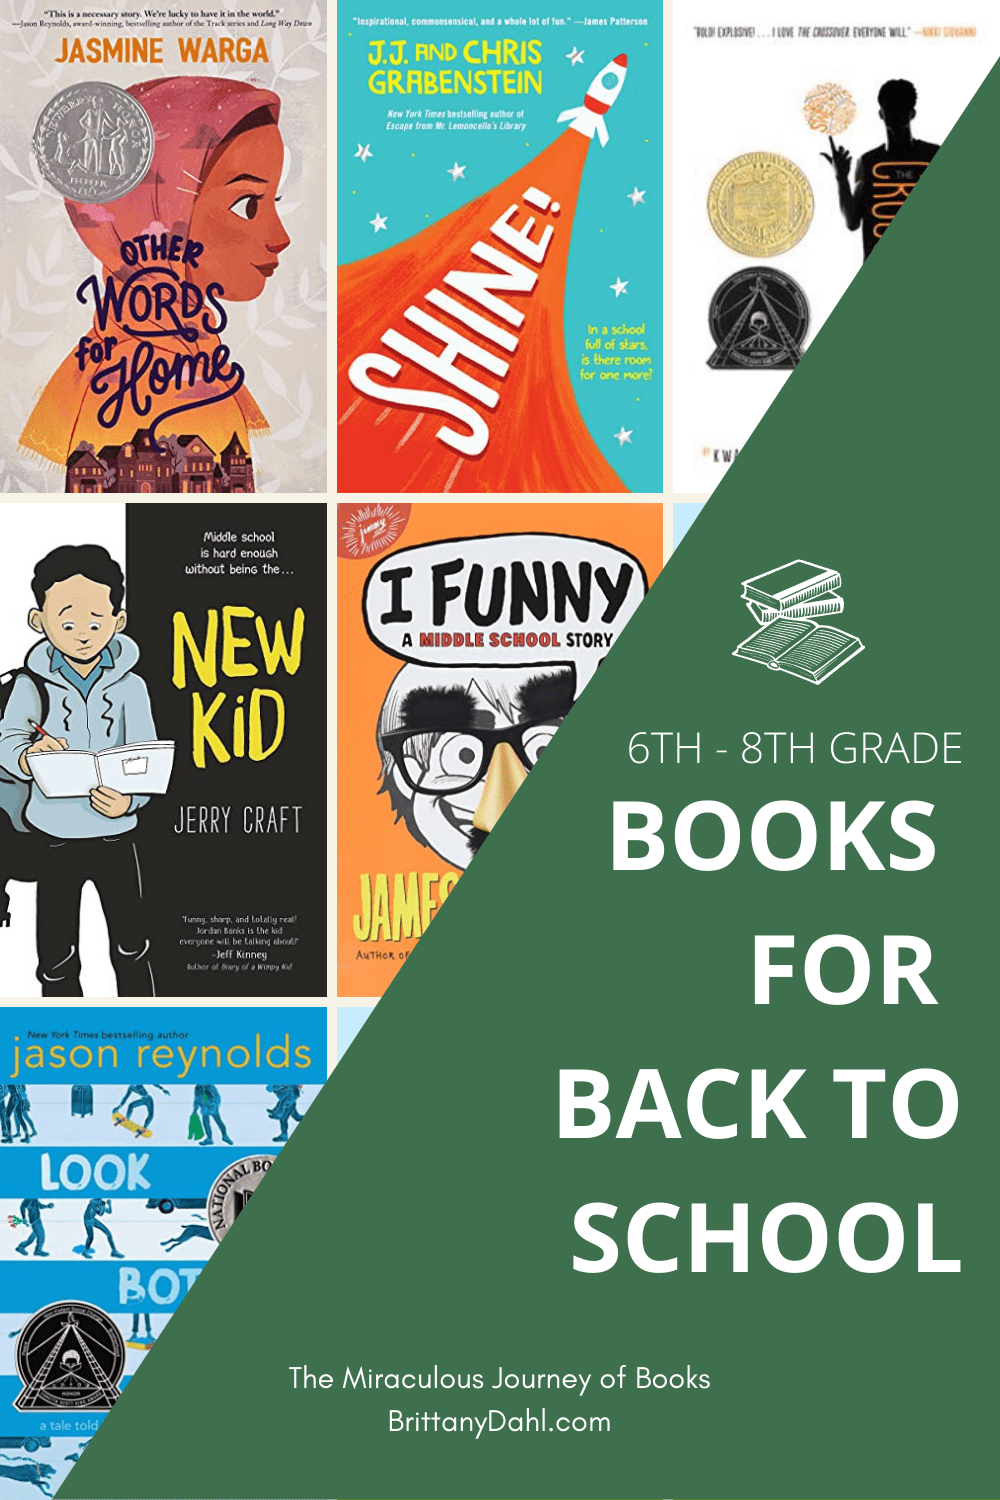 Back to School Books for 6th – 8th Grade